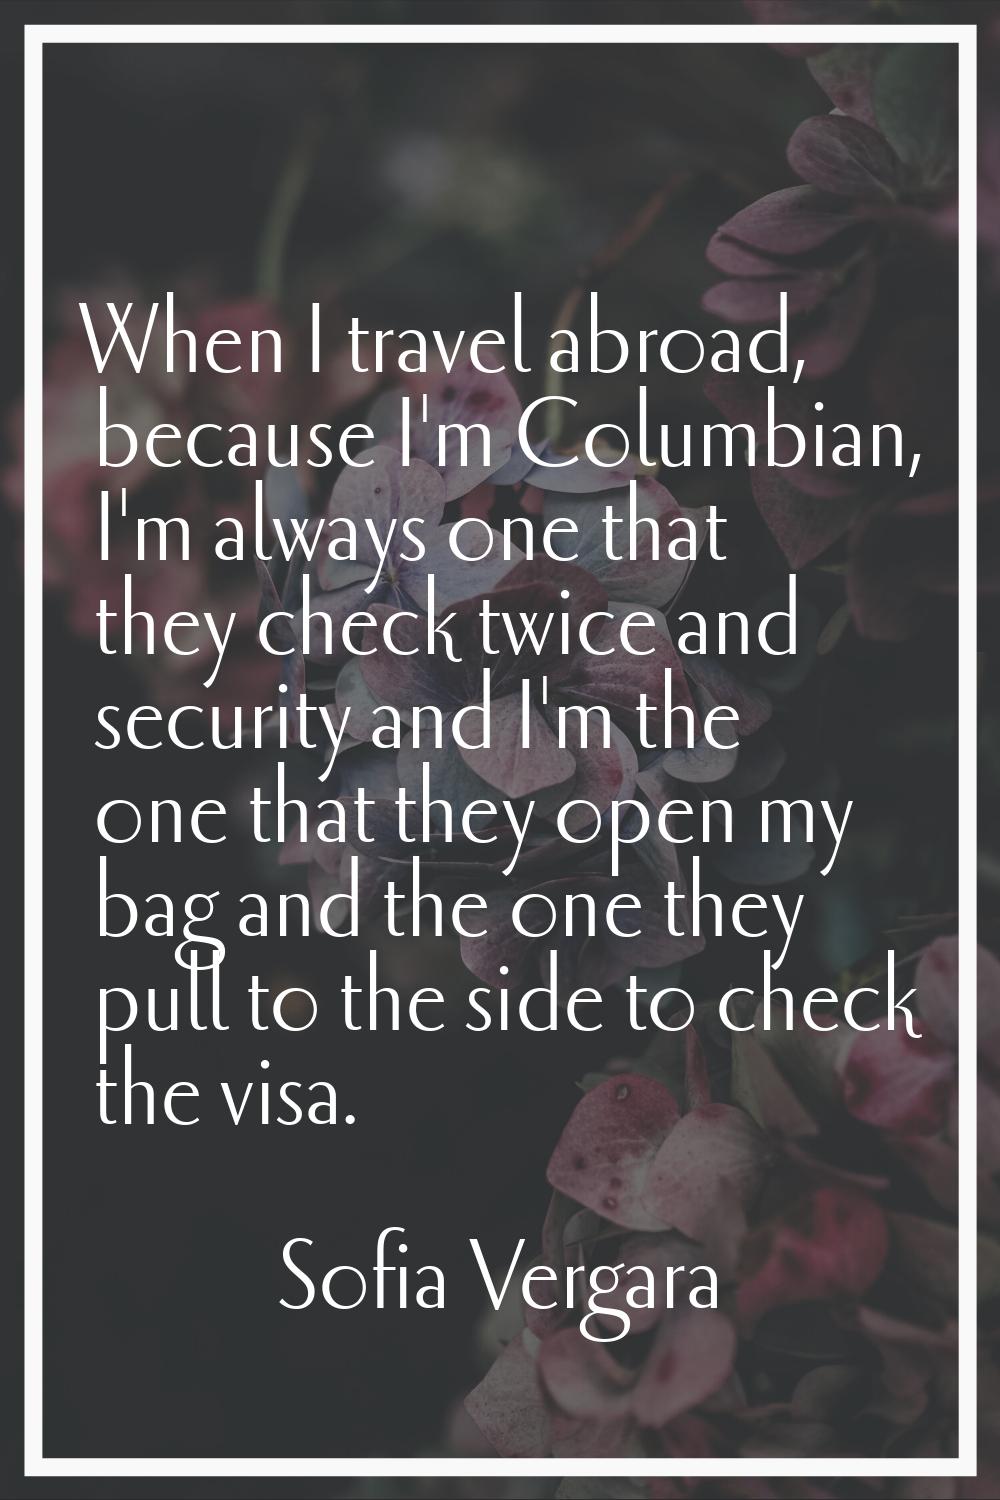 When I travel abroad, because I'm Columbian, I'm always one that they check twice and security and 